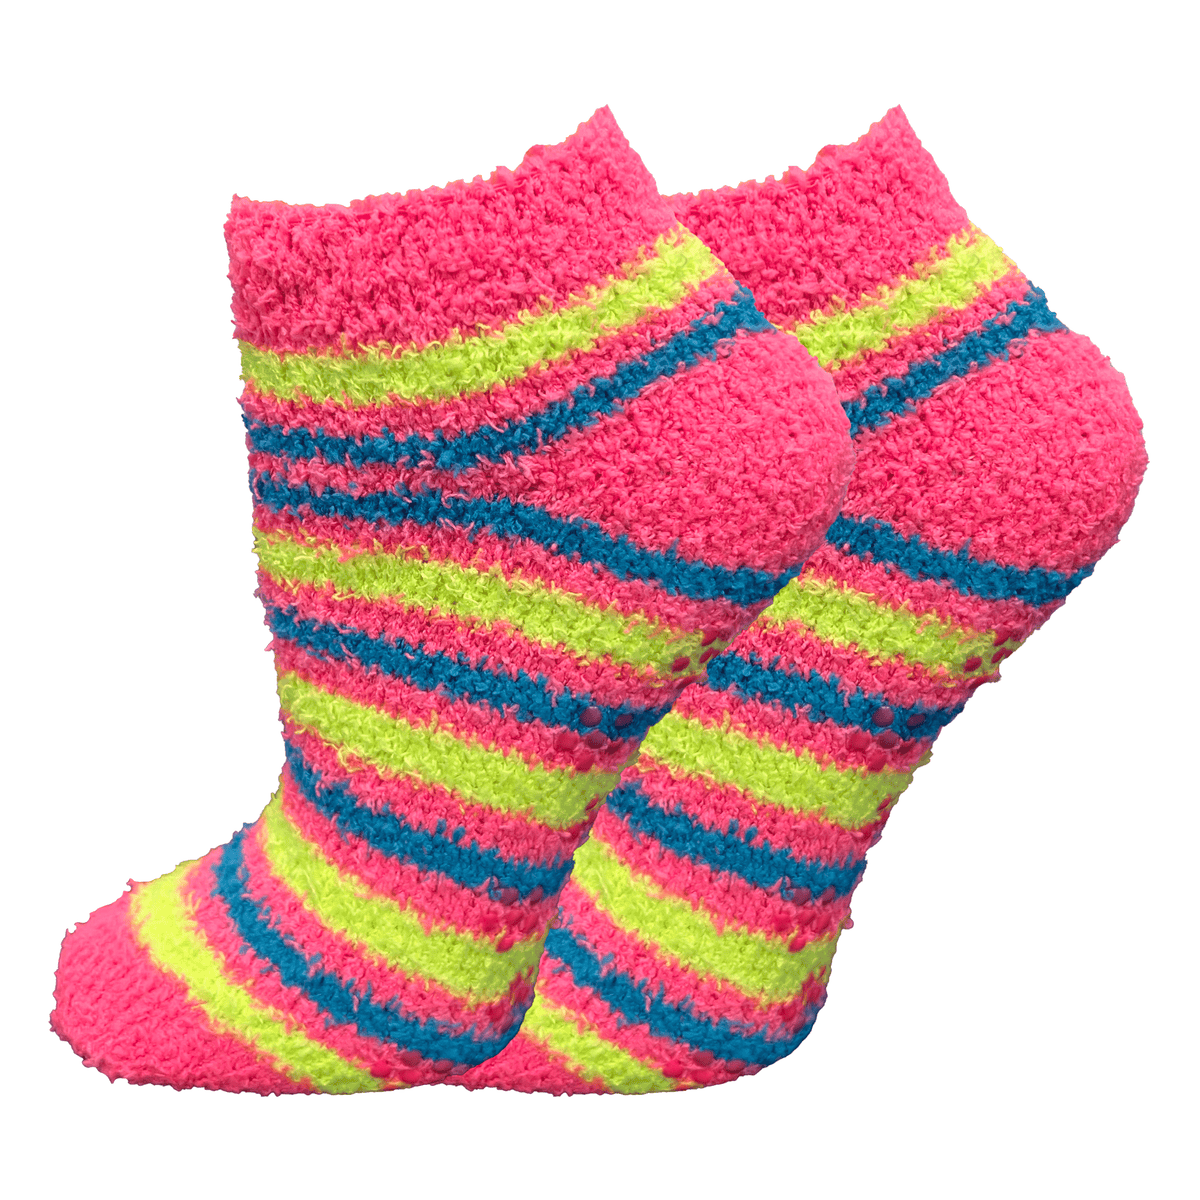 NonSkid No Show Striped Fuzzy Socks Hot pink